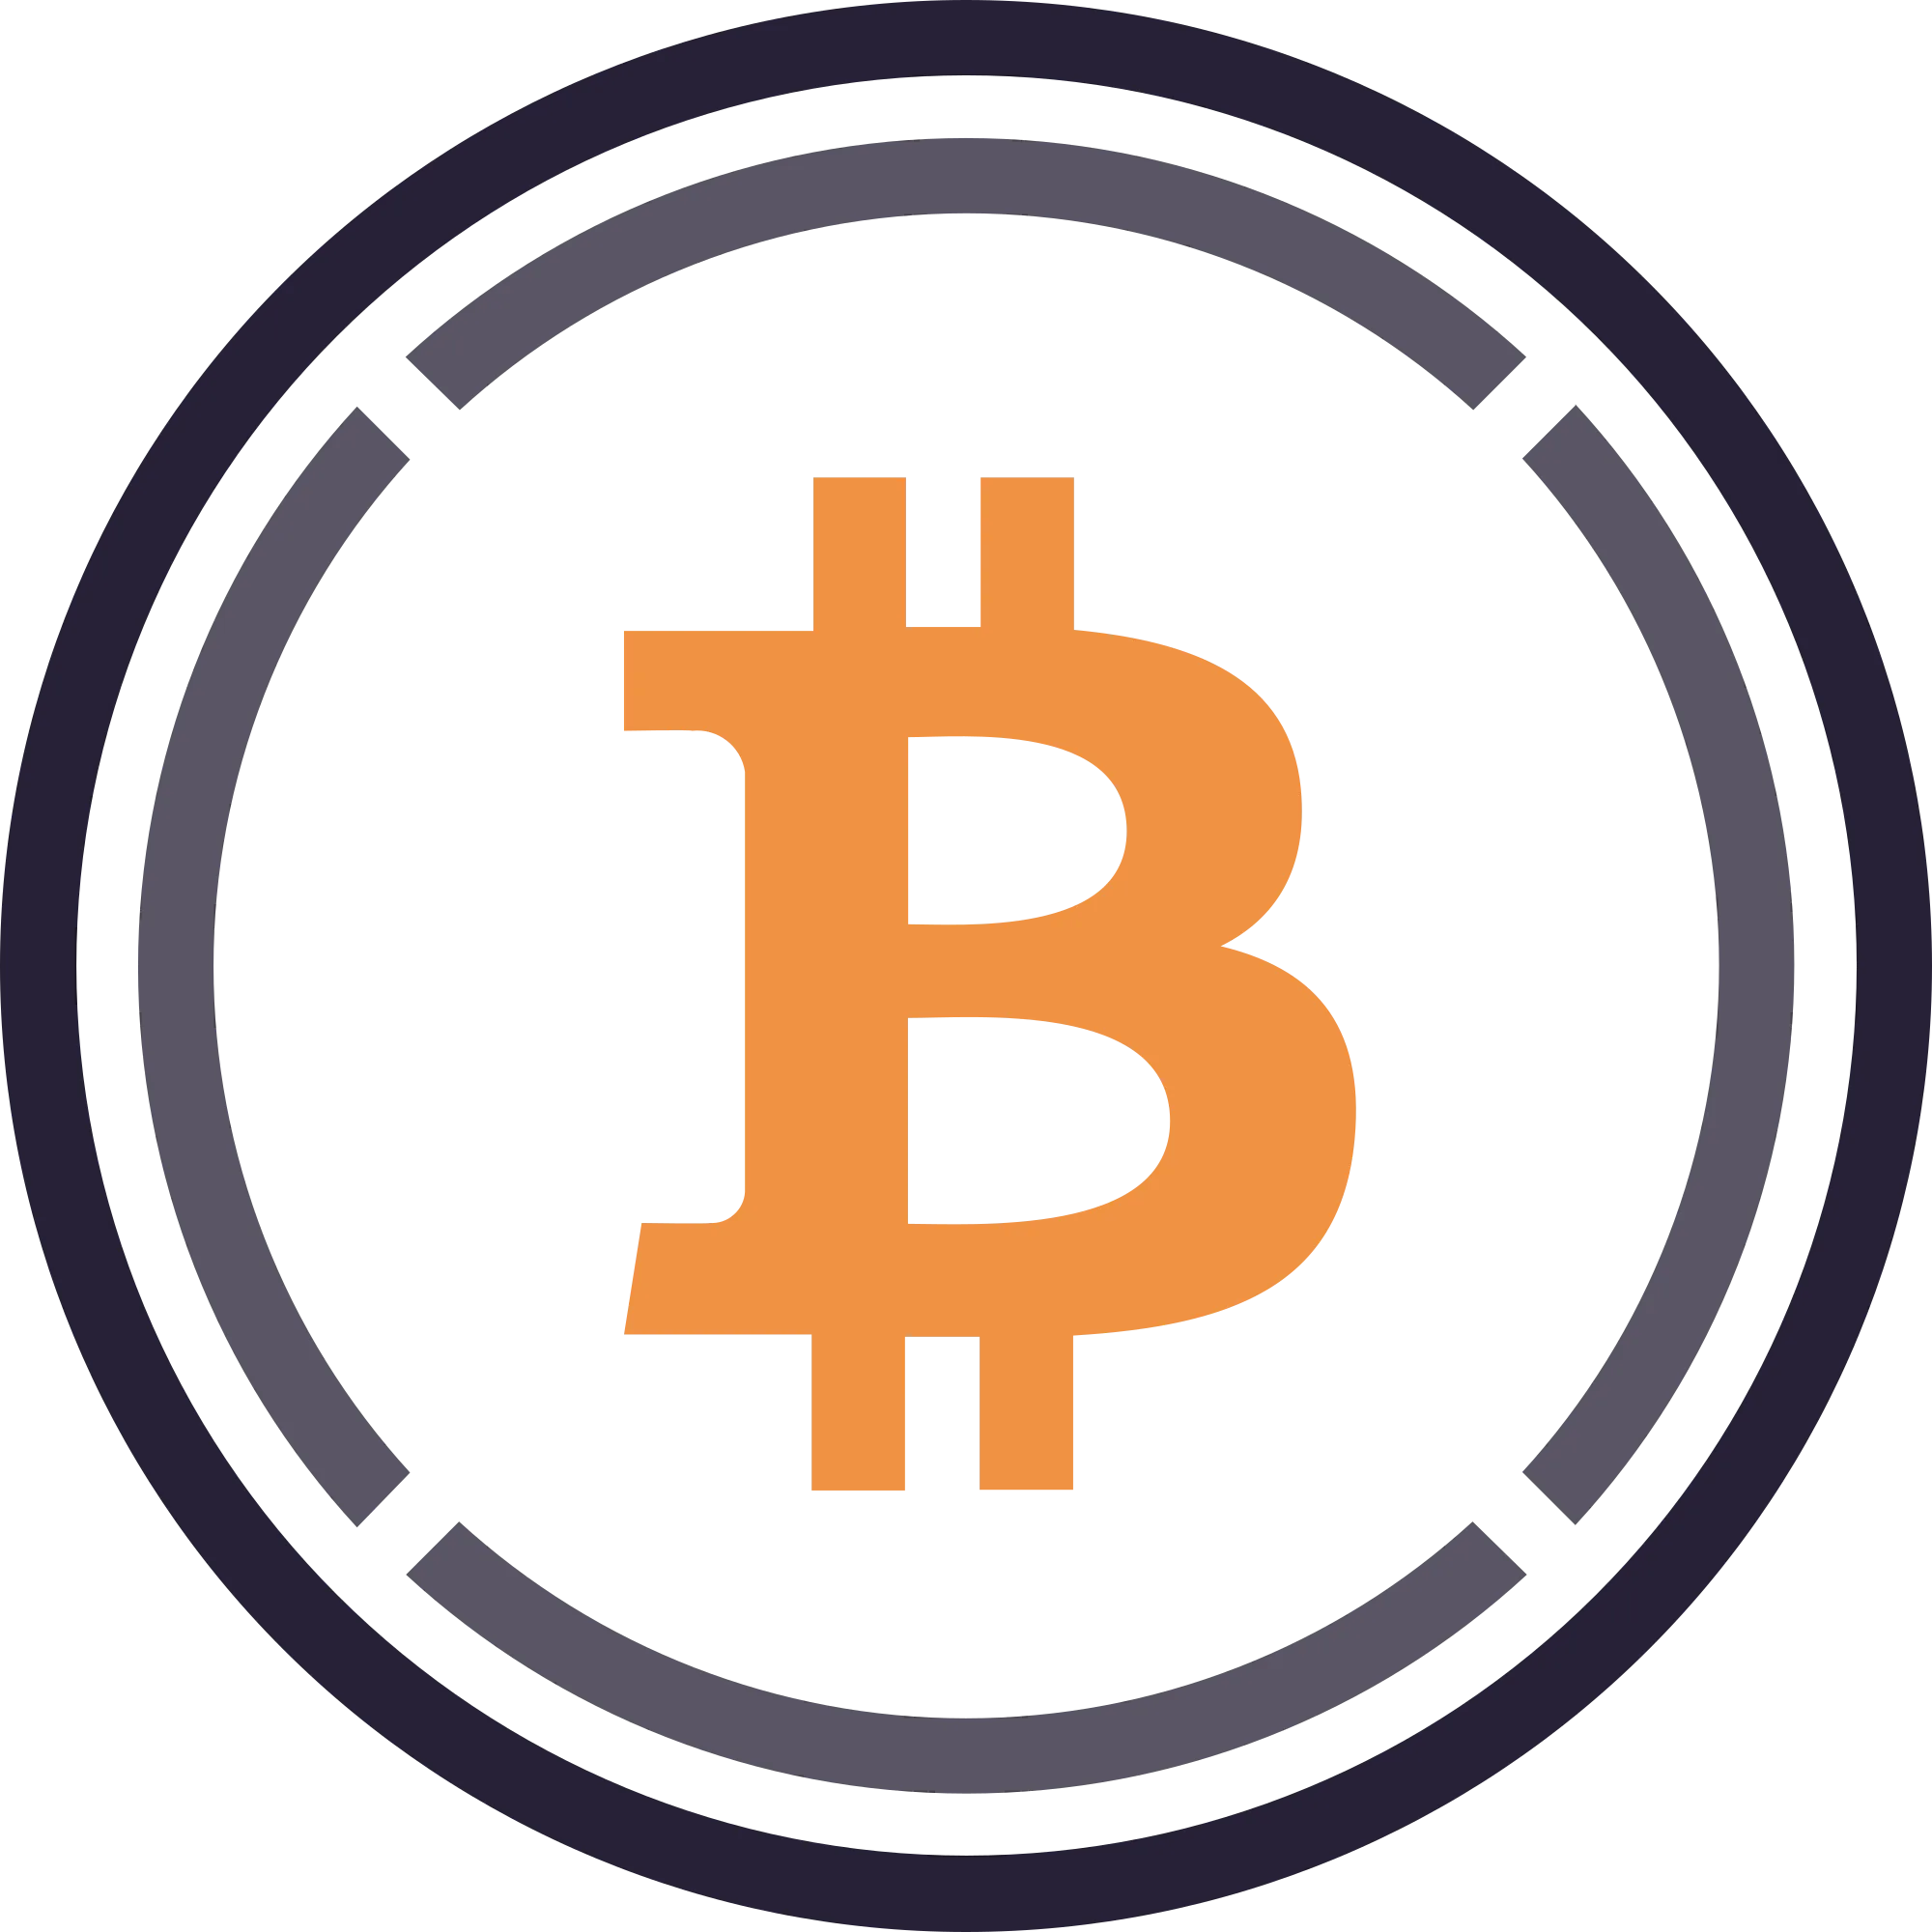 Wrapped Bitcoin logo in png format